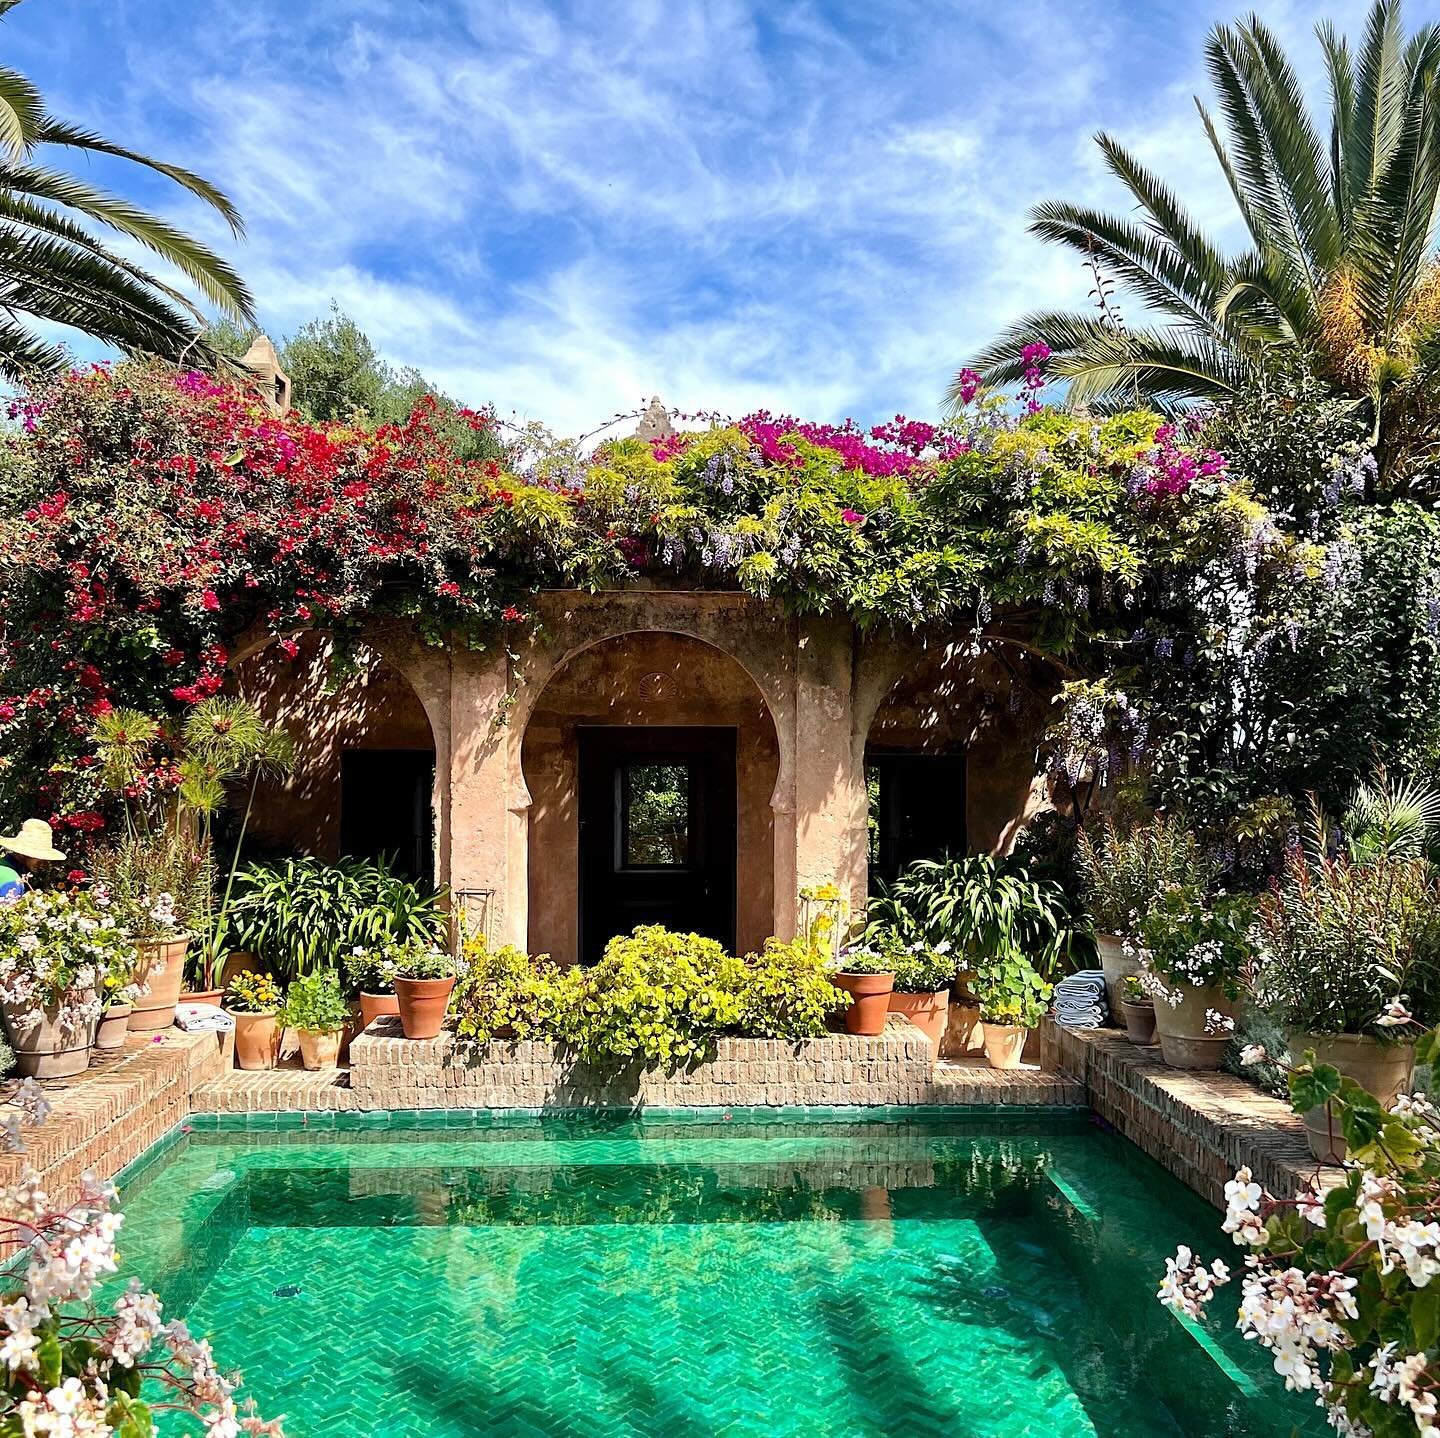 Boutique at its best. The ever so pretty Villa Mabrouka in Tangier 🇲🇦

Sitting just on the edge of Tangier&rsquo;s kasbah, a discreet gate leads into stunning peaceful gardens. Once the summer home of Yves Saint Laurent and Pierre Berg&eacute;, it 